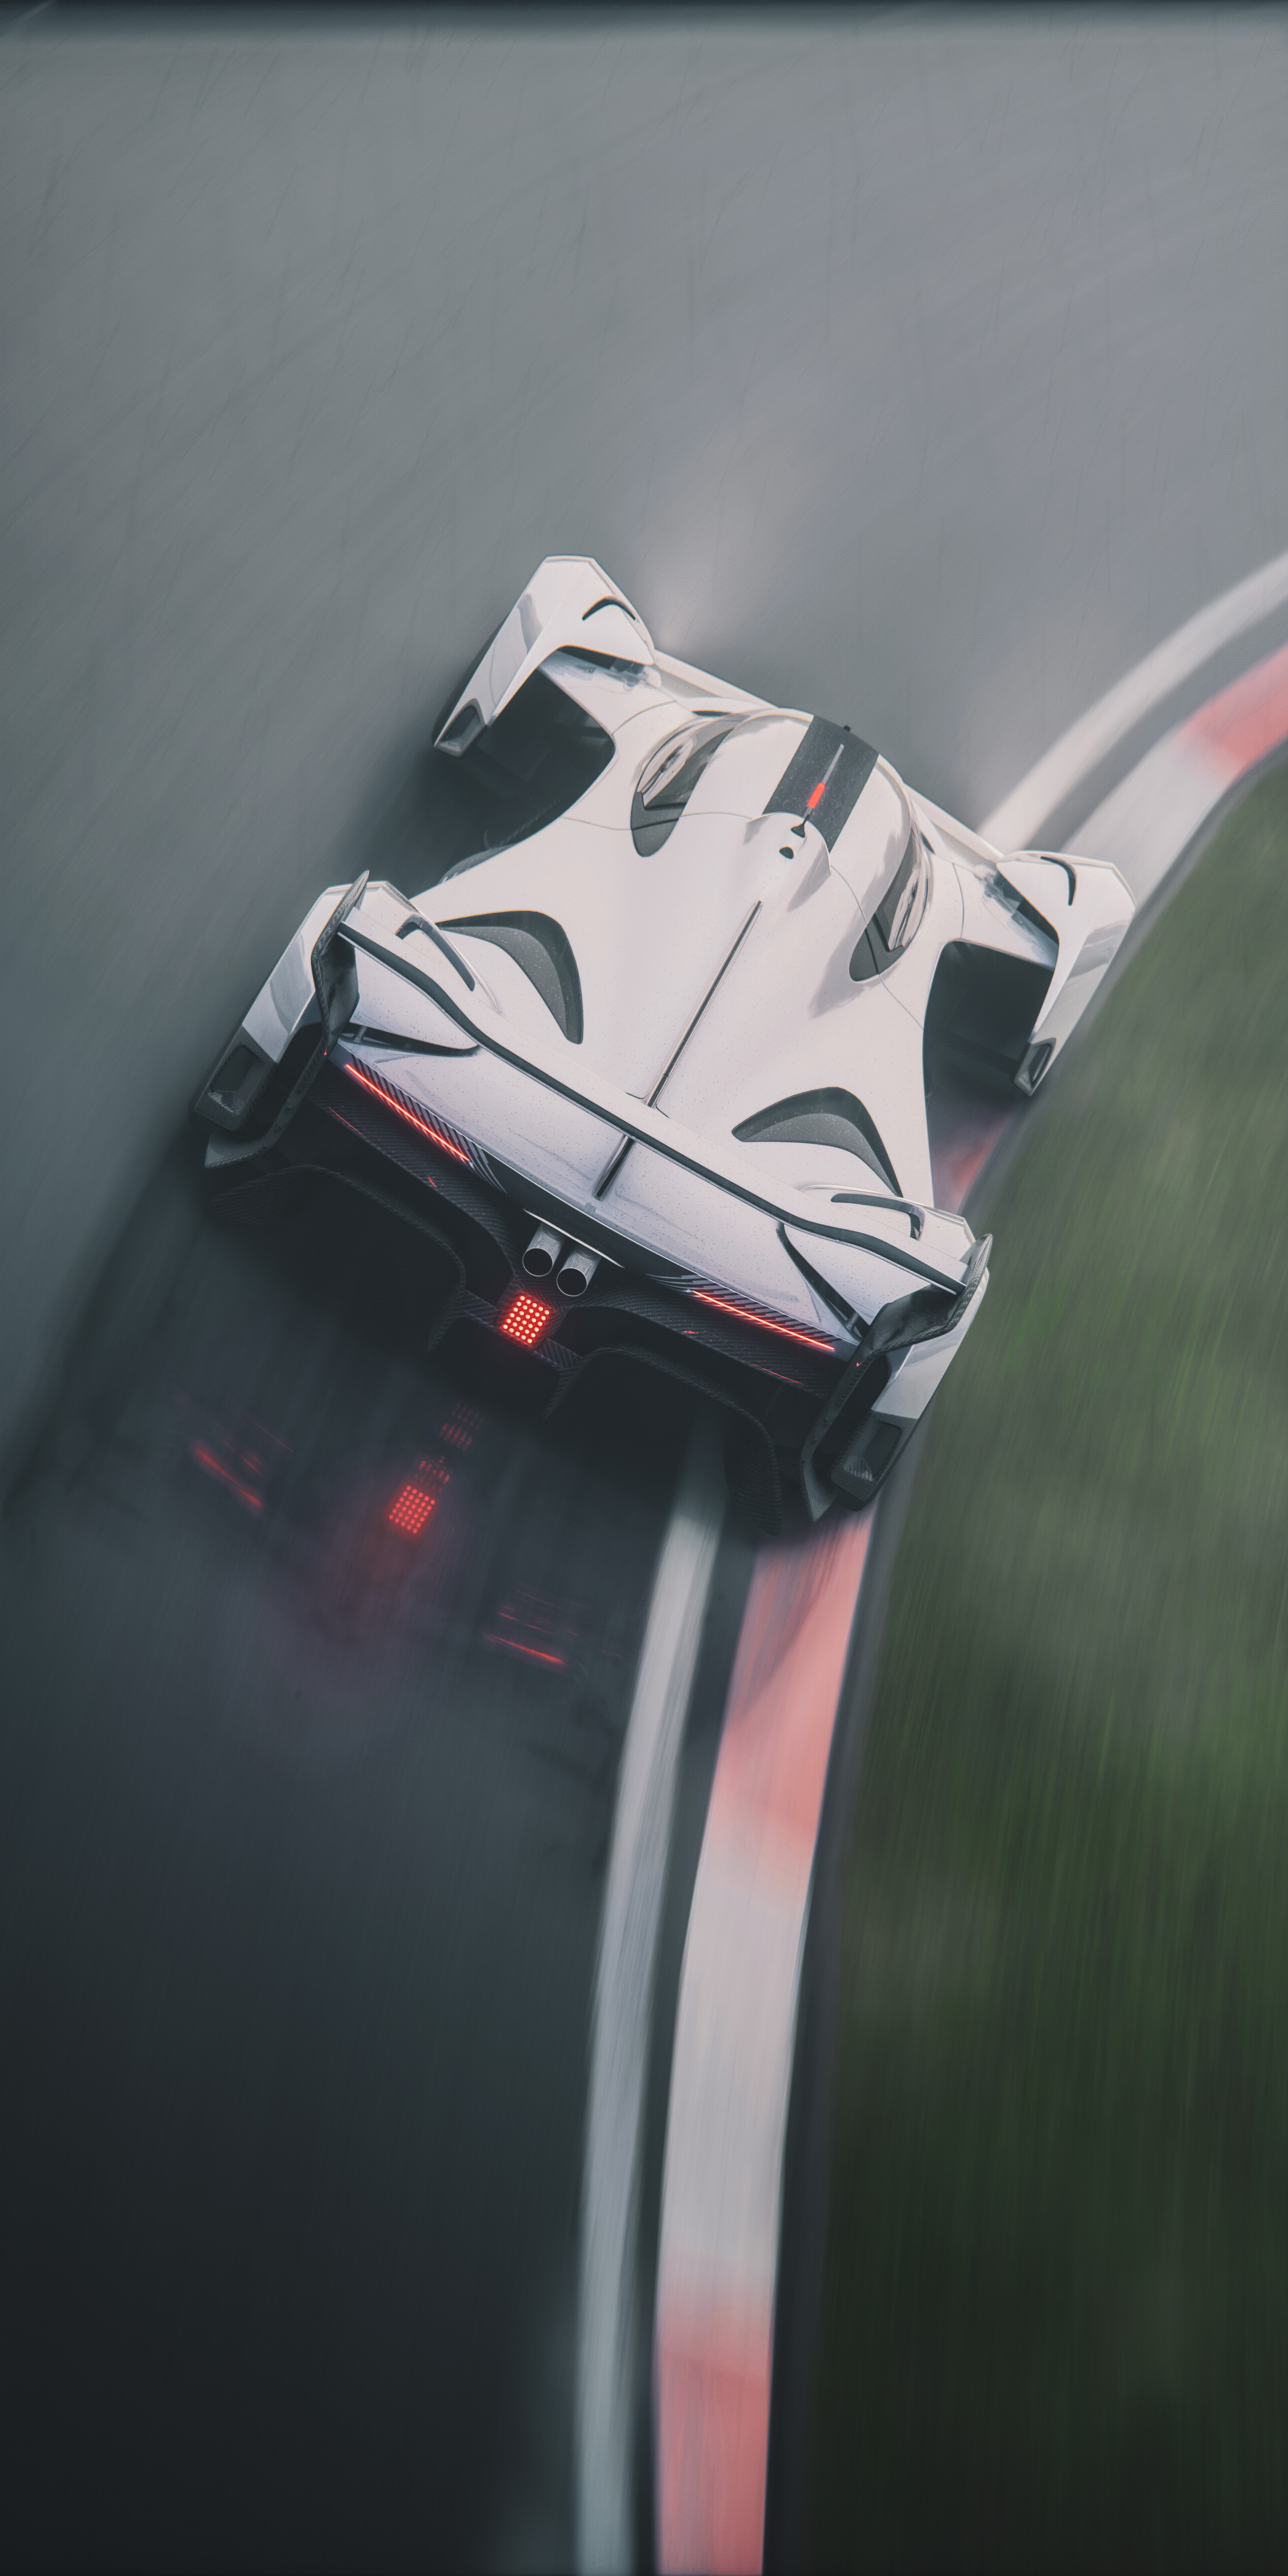 General 3840x7680 McLaren Solus GT car race tracks Assetto Corsa PC gaming vehicle video game art screen shot video games driving portrait display rear view motion blur blurred white cars